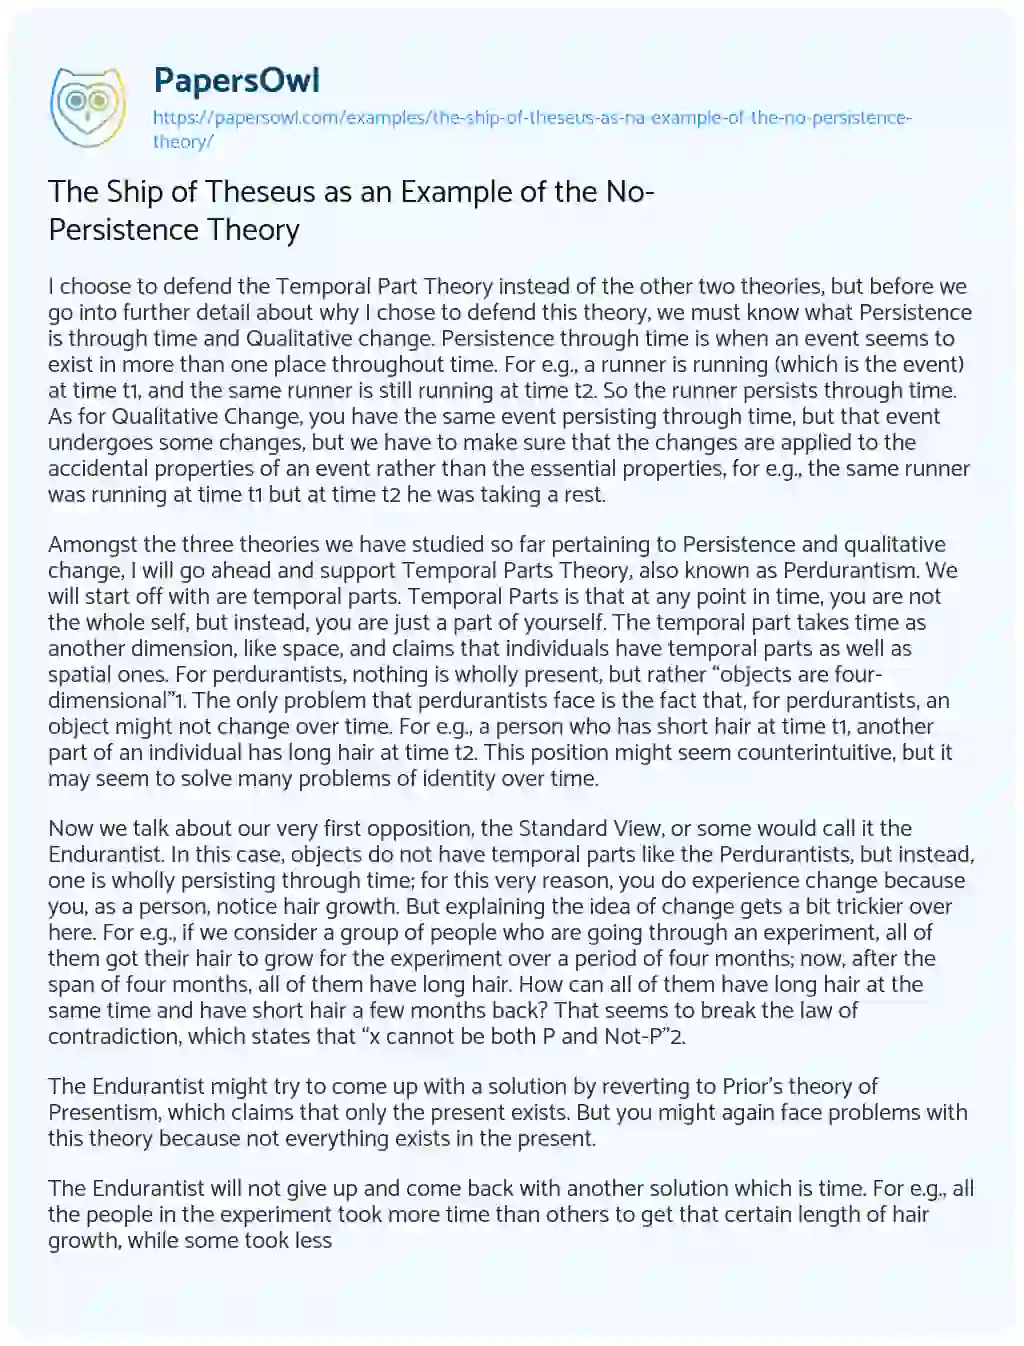 Essay on The Ship of Theseus as an Example of the No-Persistence Theory